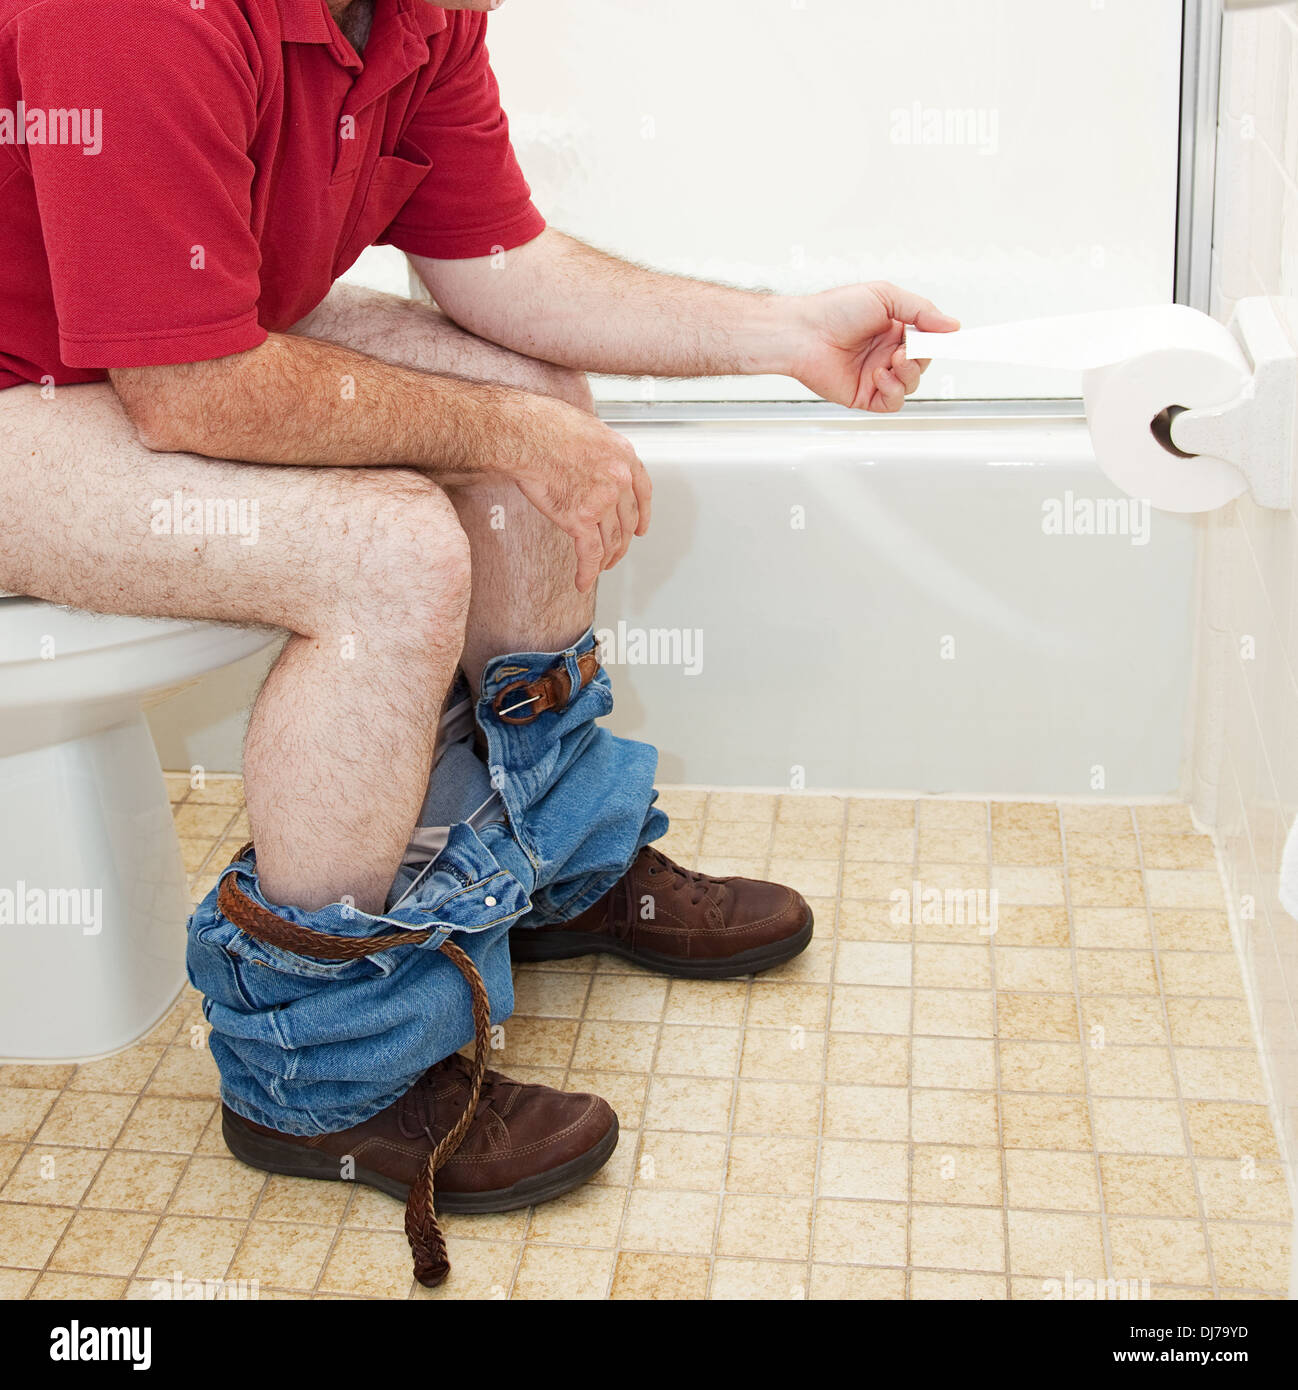 Man Sitting In The Bathroom On The Toilet Pulling Off A Piece Of